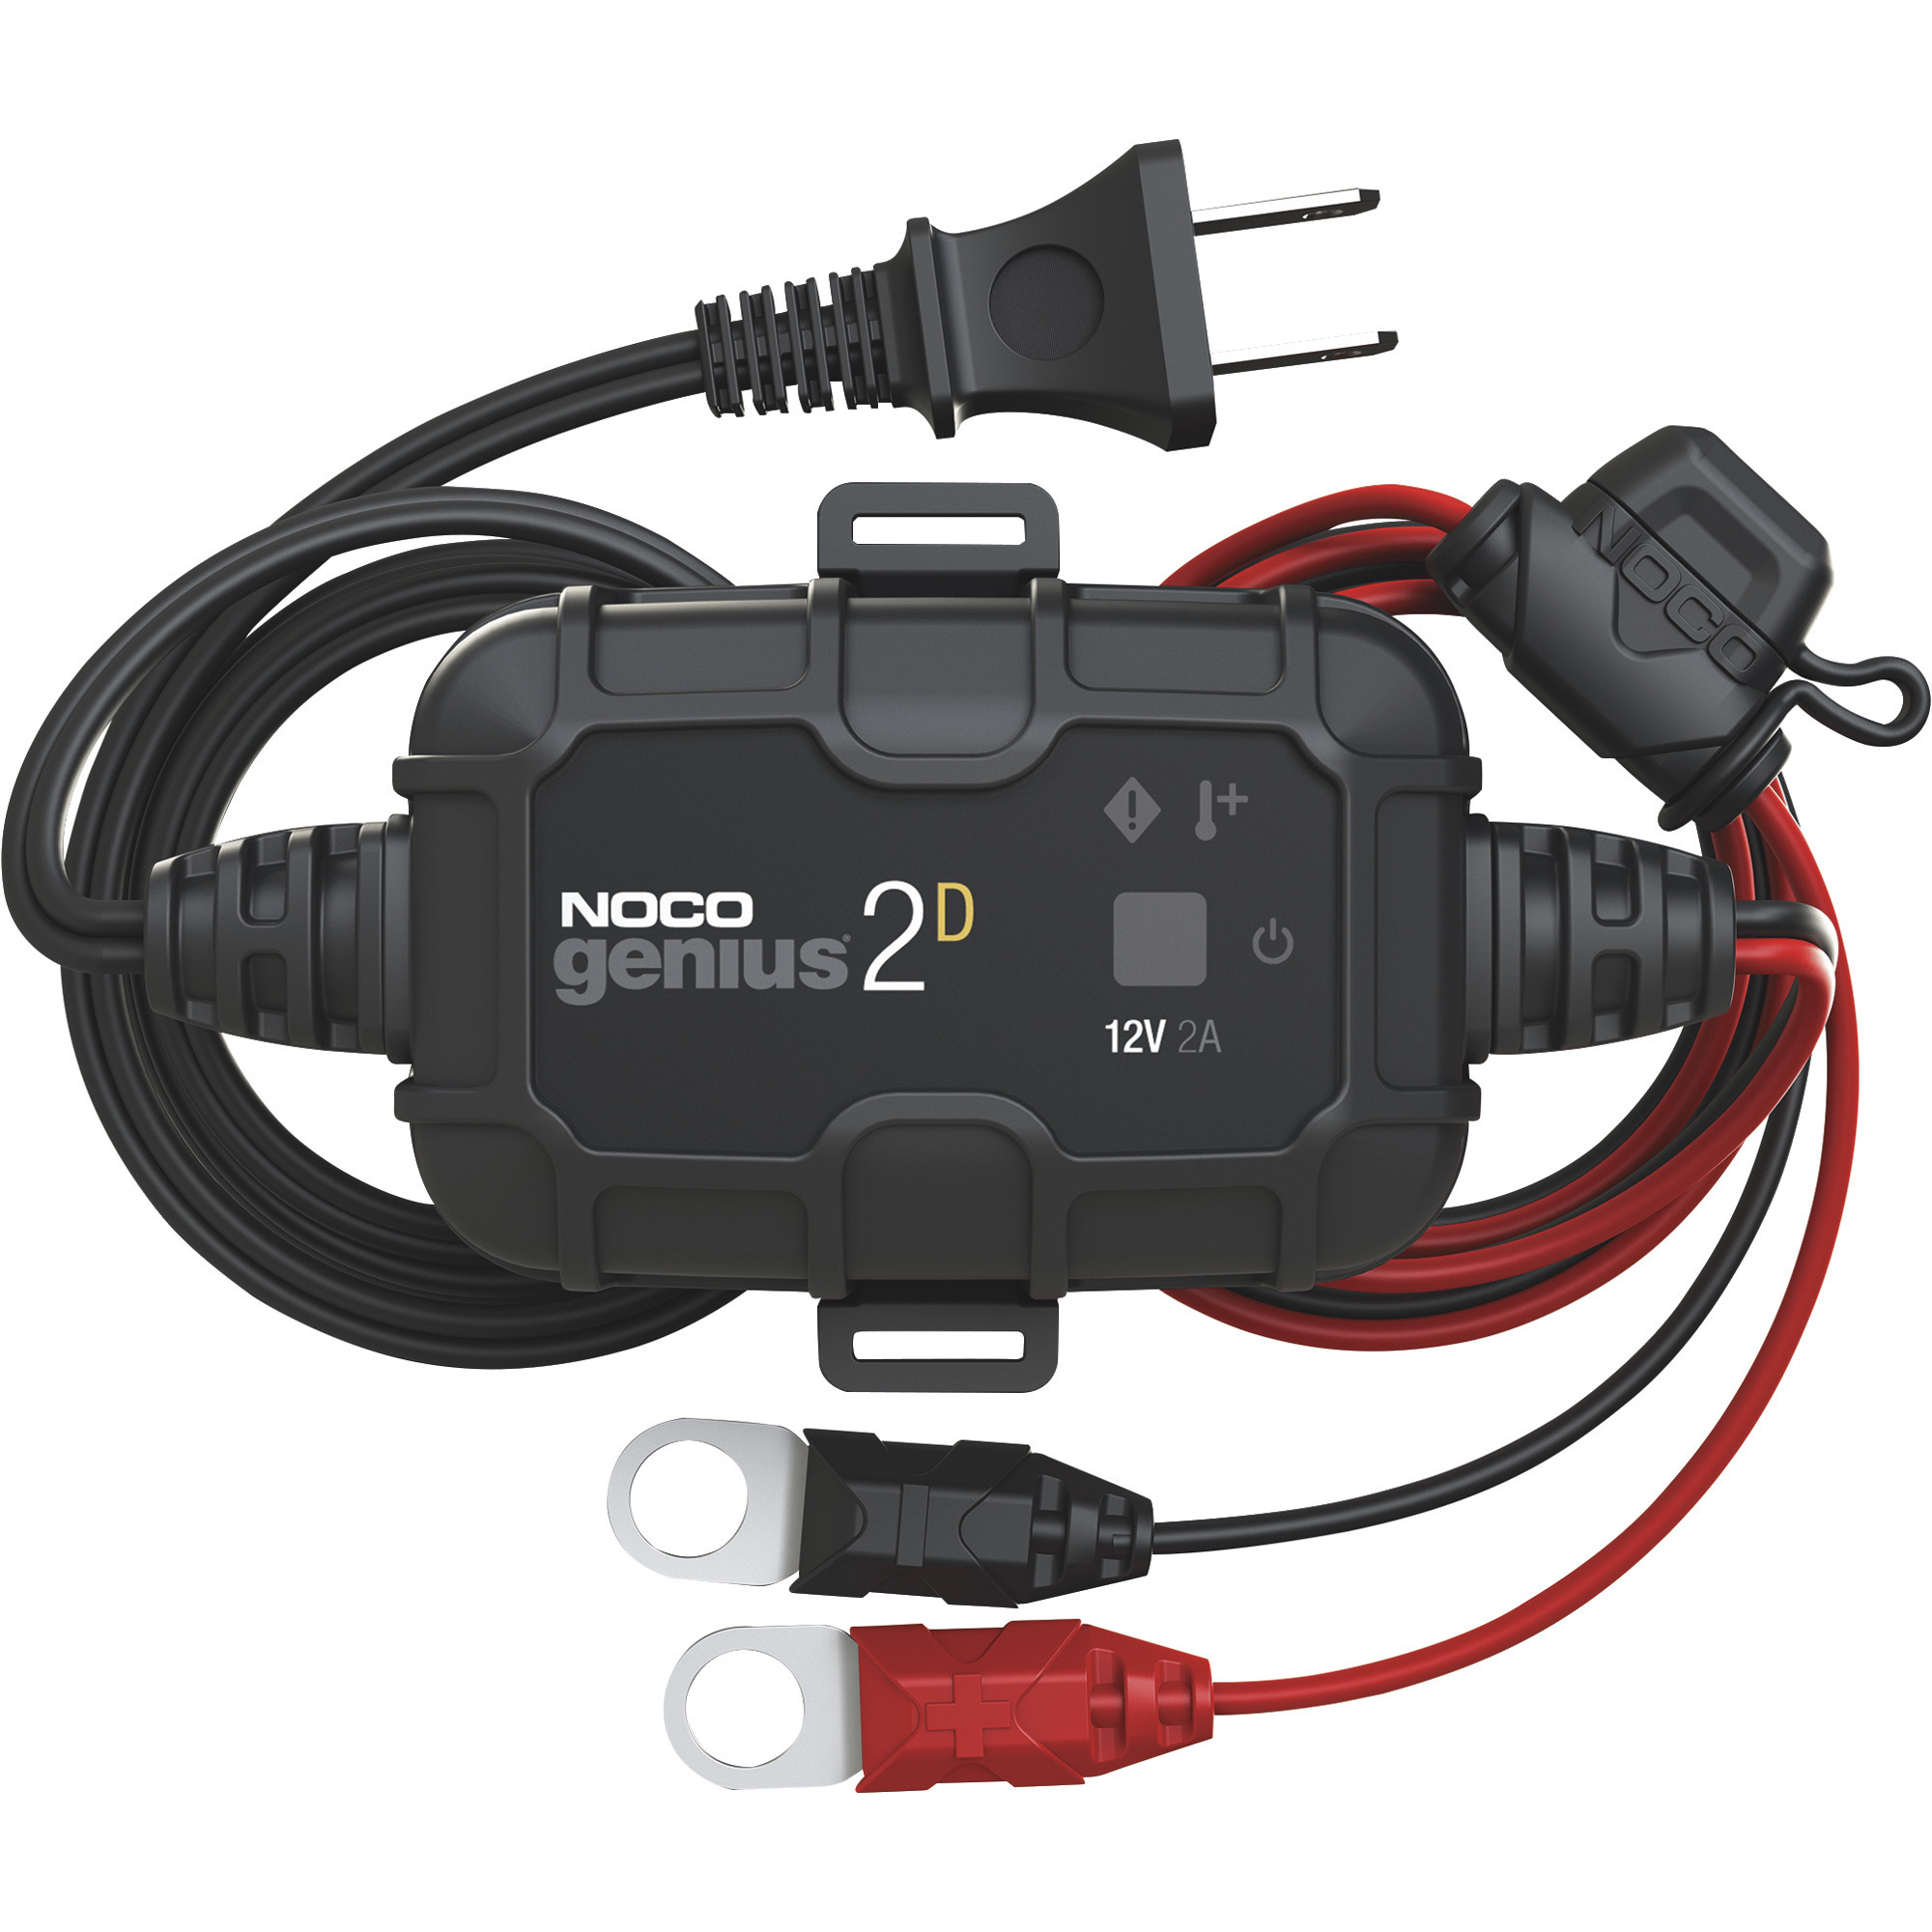 NOCO Genius2D Direct Mount Battery Charger/Maintainer â 2 Amp, 12 Volt, Model GENIUS2D